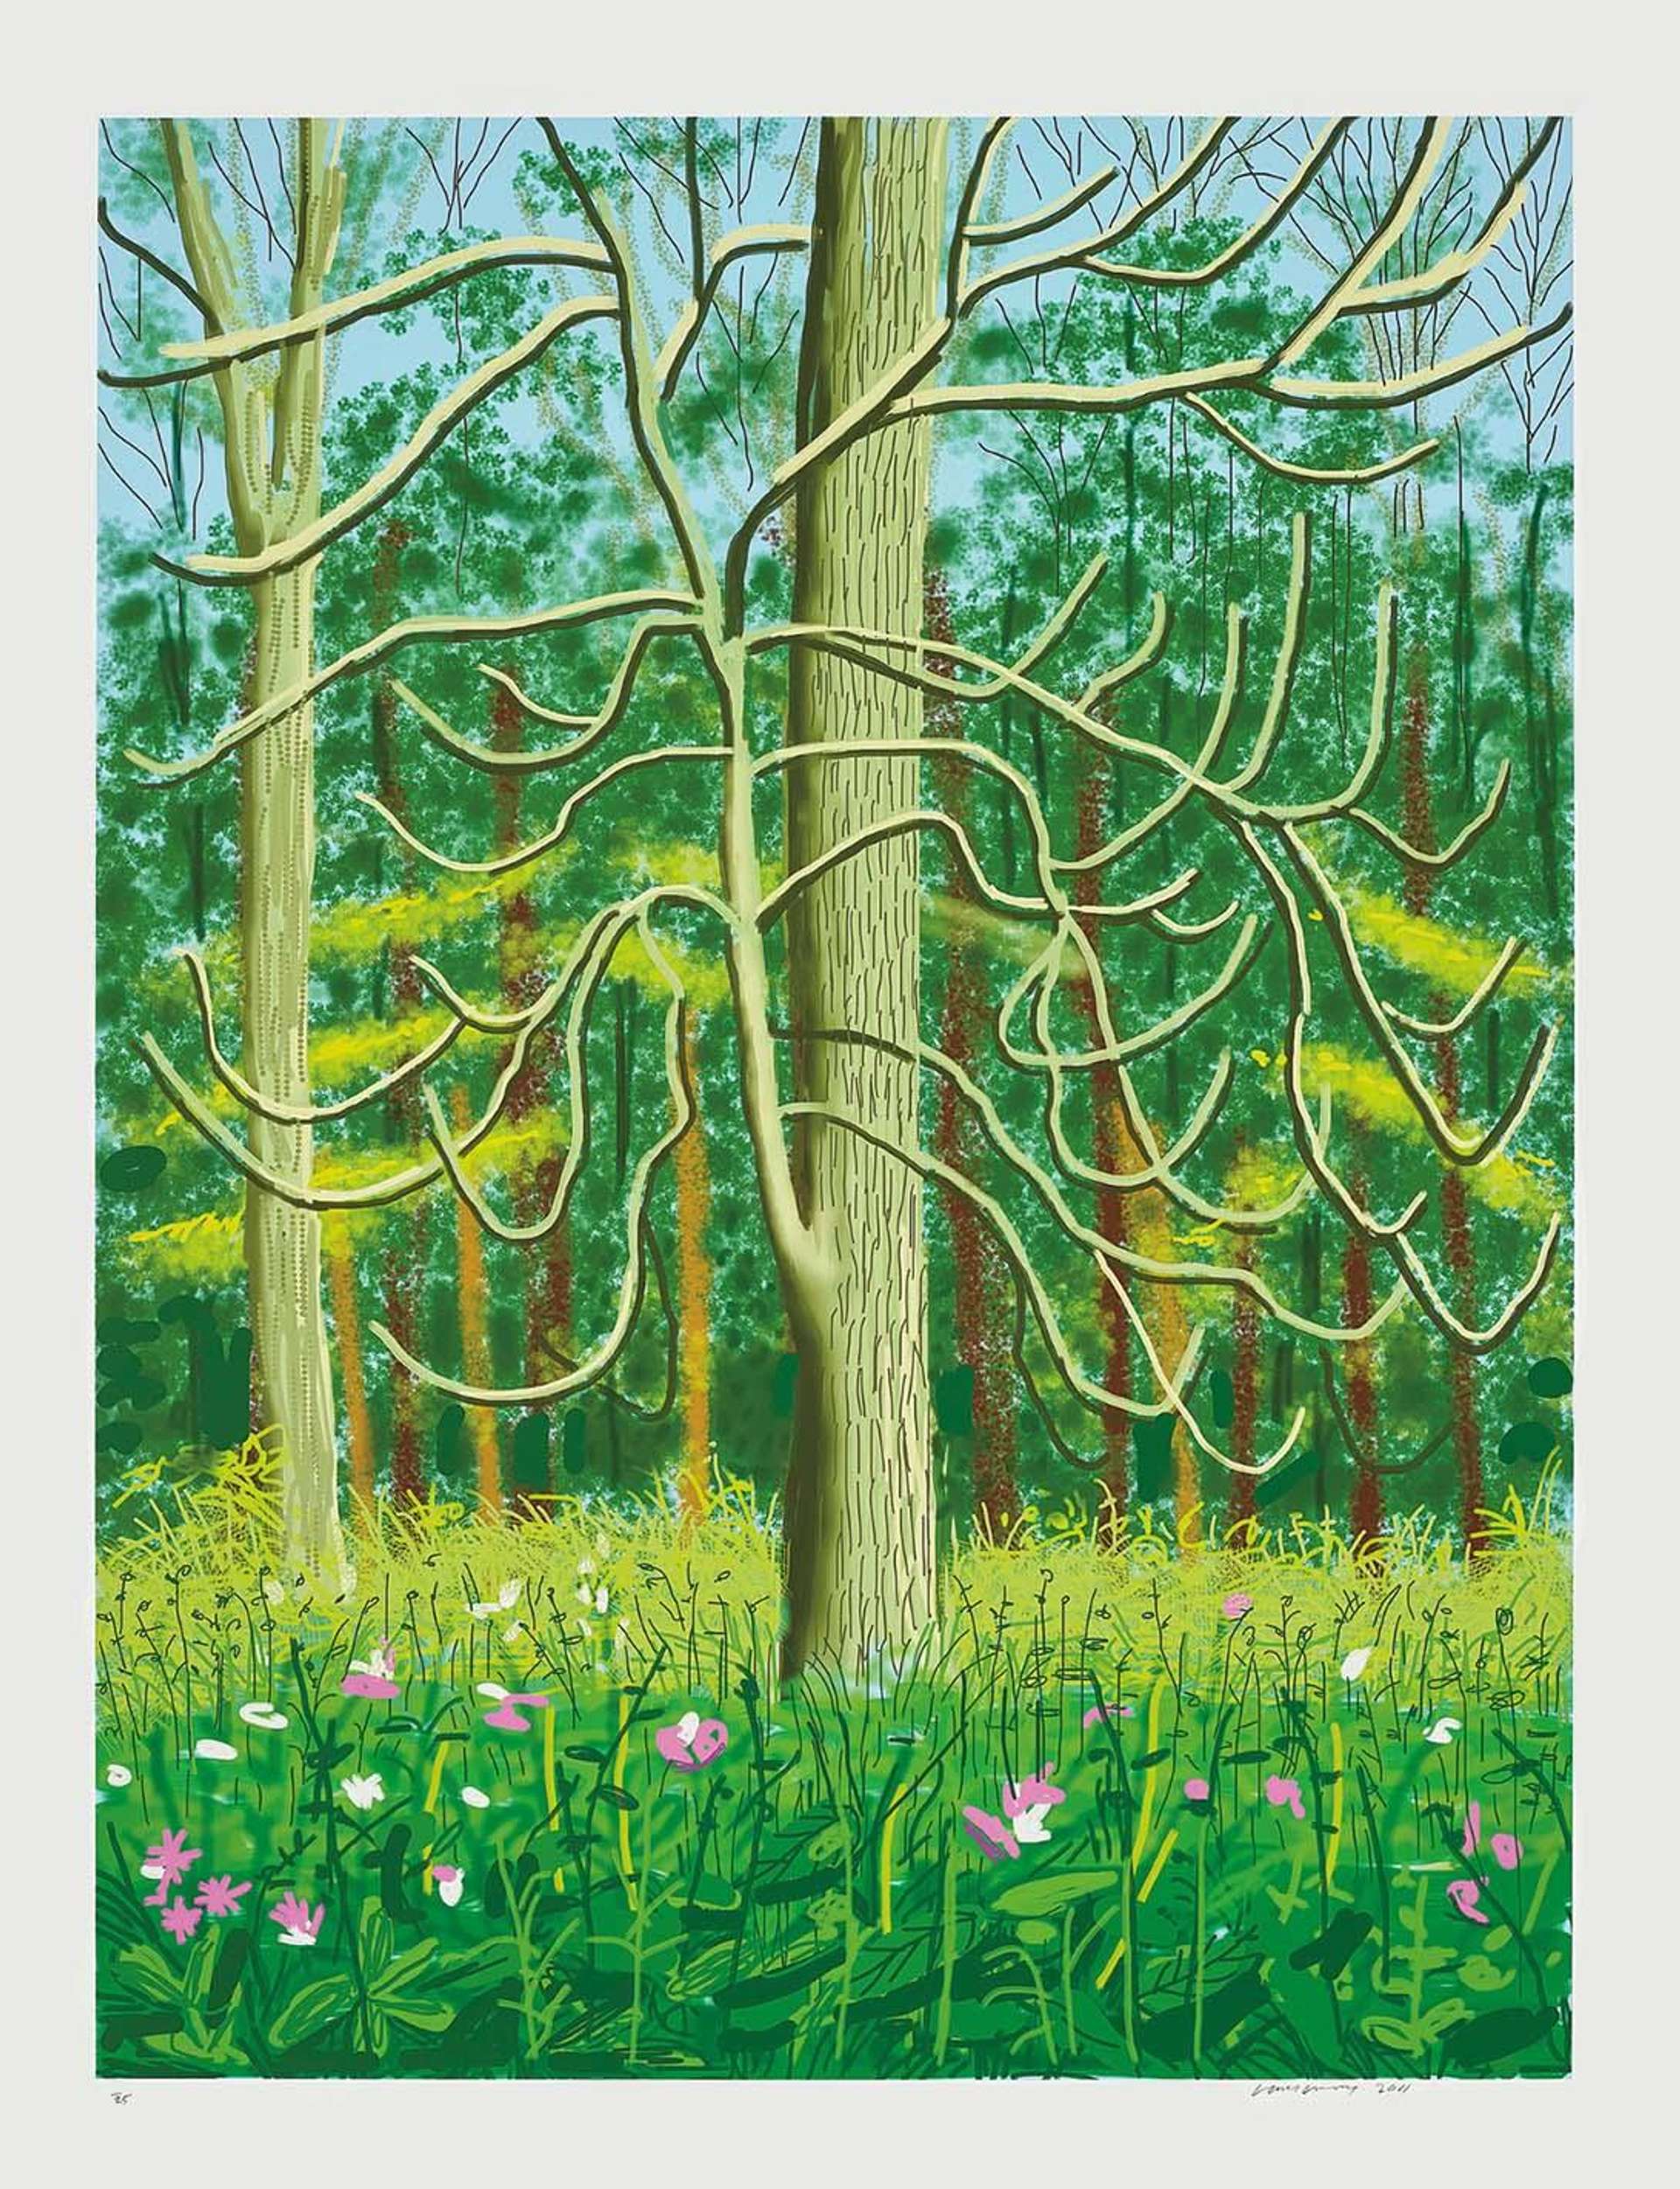 The Arrival Of Spring In Woldgate East Yorkshire 4th May 2011 by David Hockney